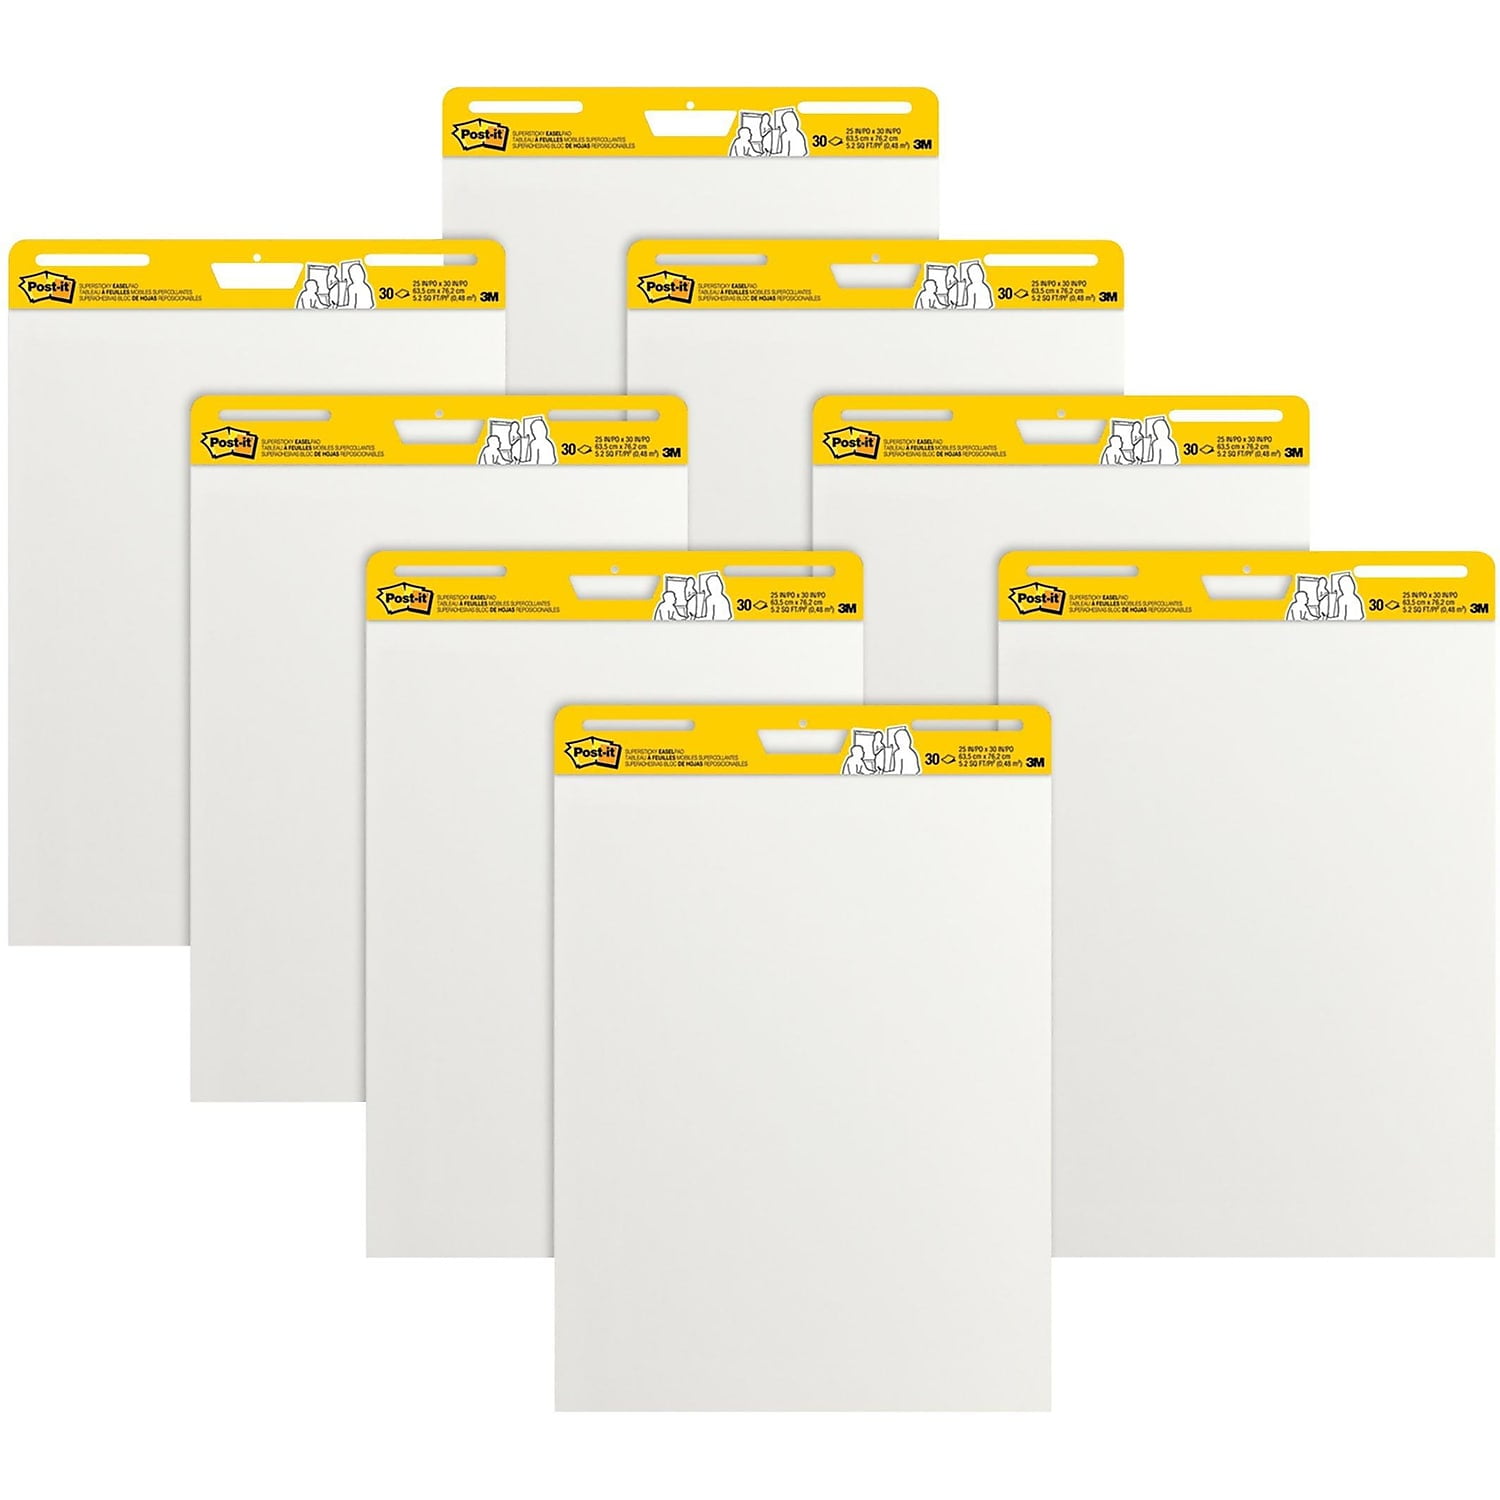  Post-it Super Sticky Mini Easel Pad, 15 x 18 Inches, 20 Sheets/ Pad, 6 Pads, White Premium Self Stick Flip Chart Paper, Great for Virtual  Teachers and Students (577SS) : Office Products